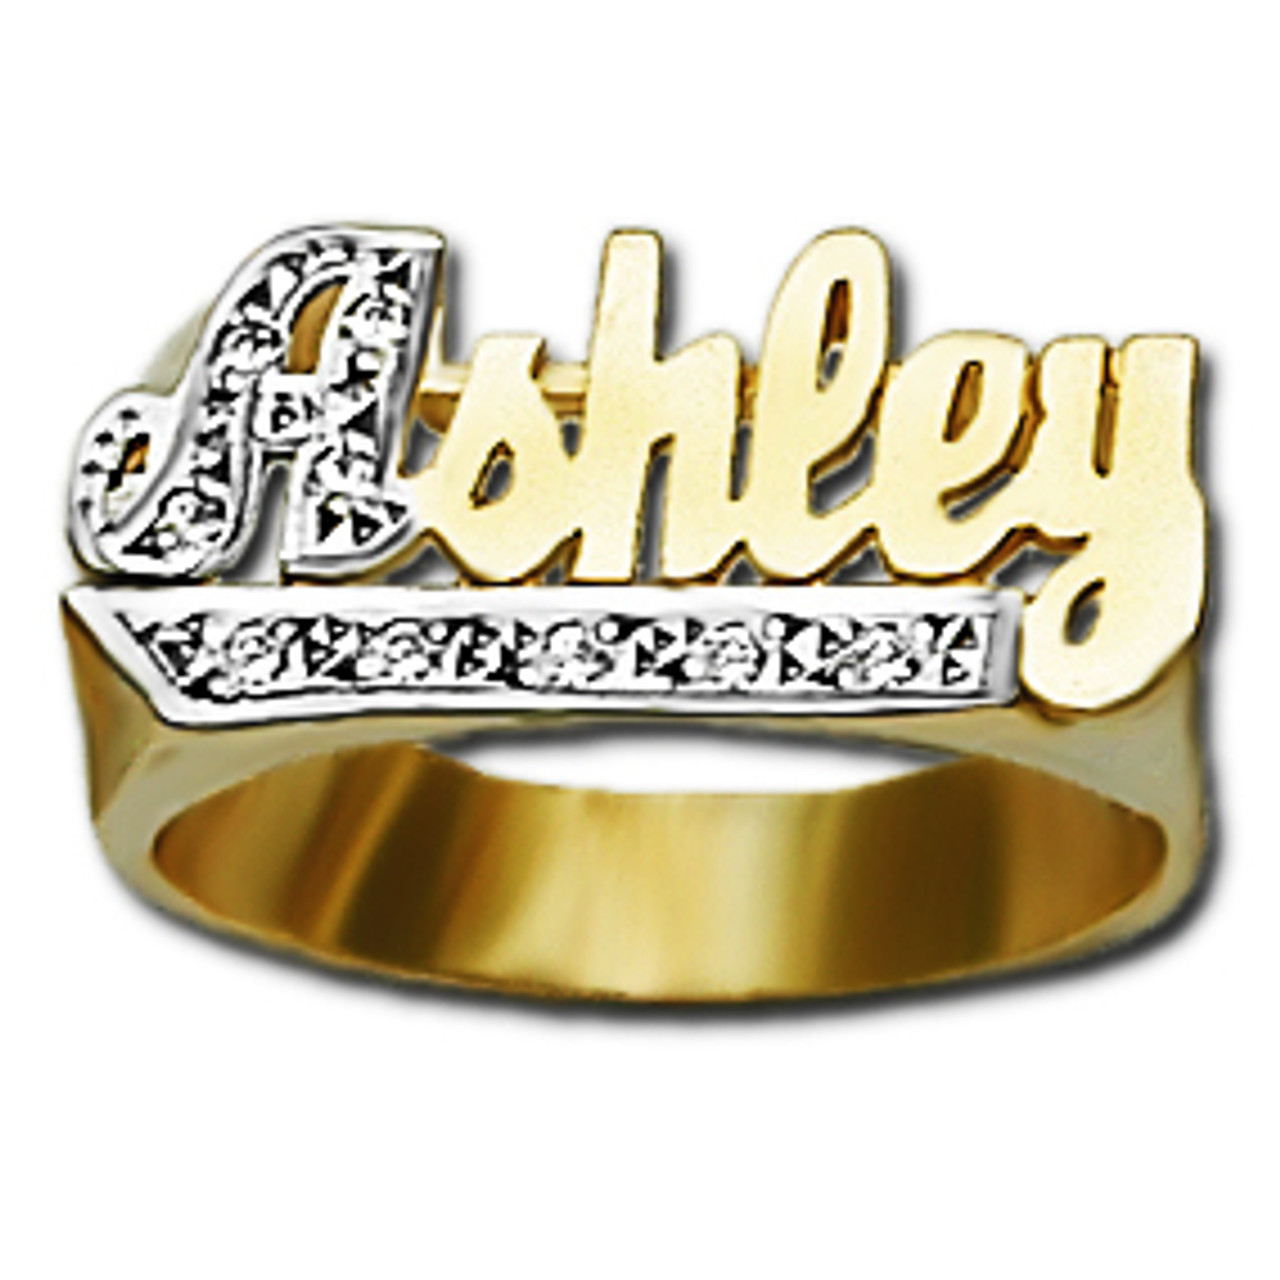 Personalized Name Ring Gold | Name Rings For Men | | Couple ring design,  Couple wedding rings, Engagement rings couple